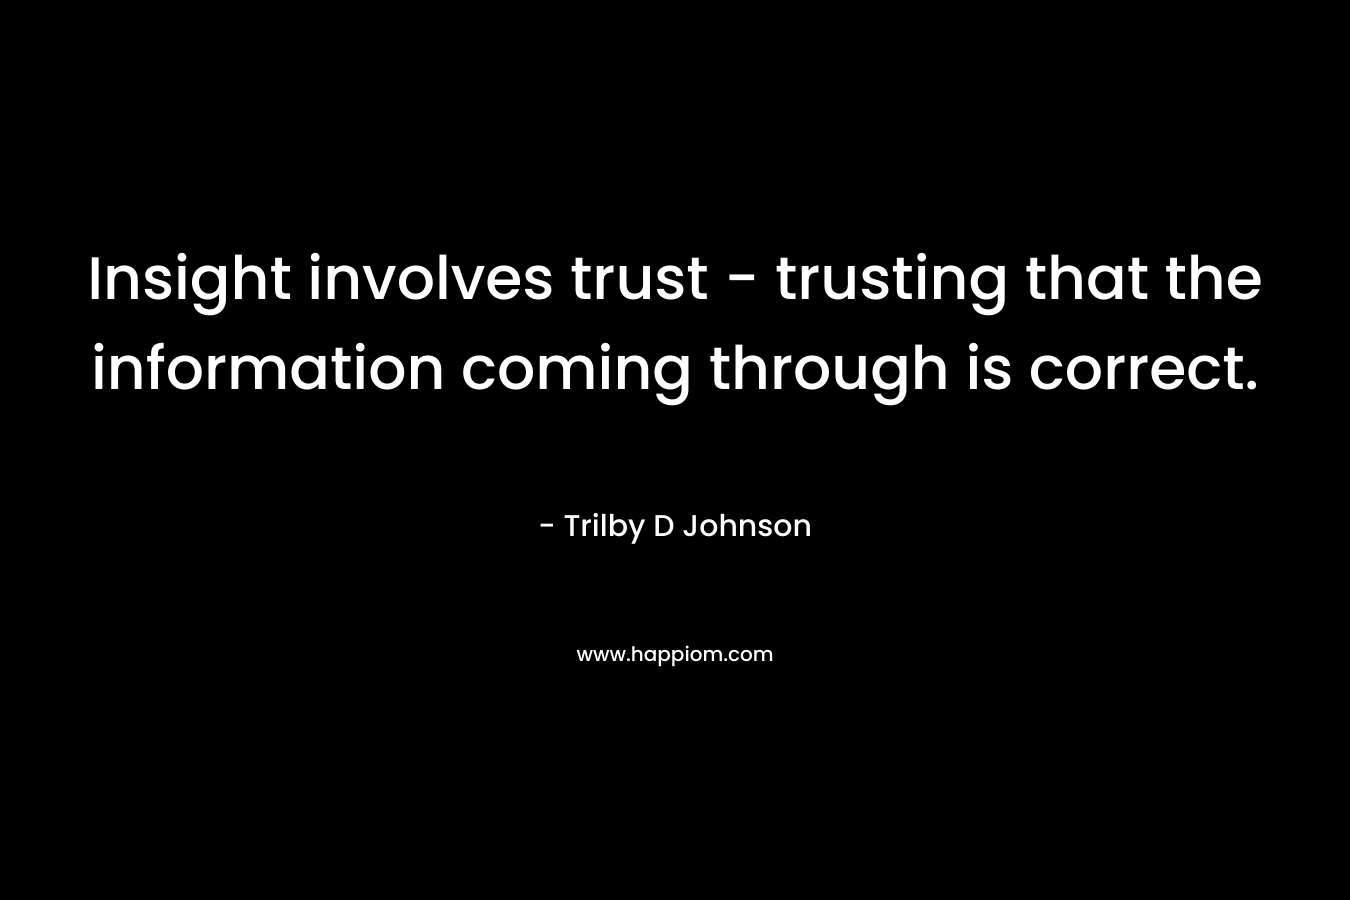 Insight involves trust - trusting that the information coming through is correct.